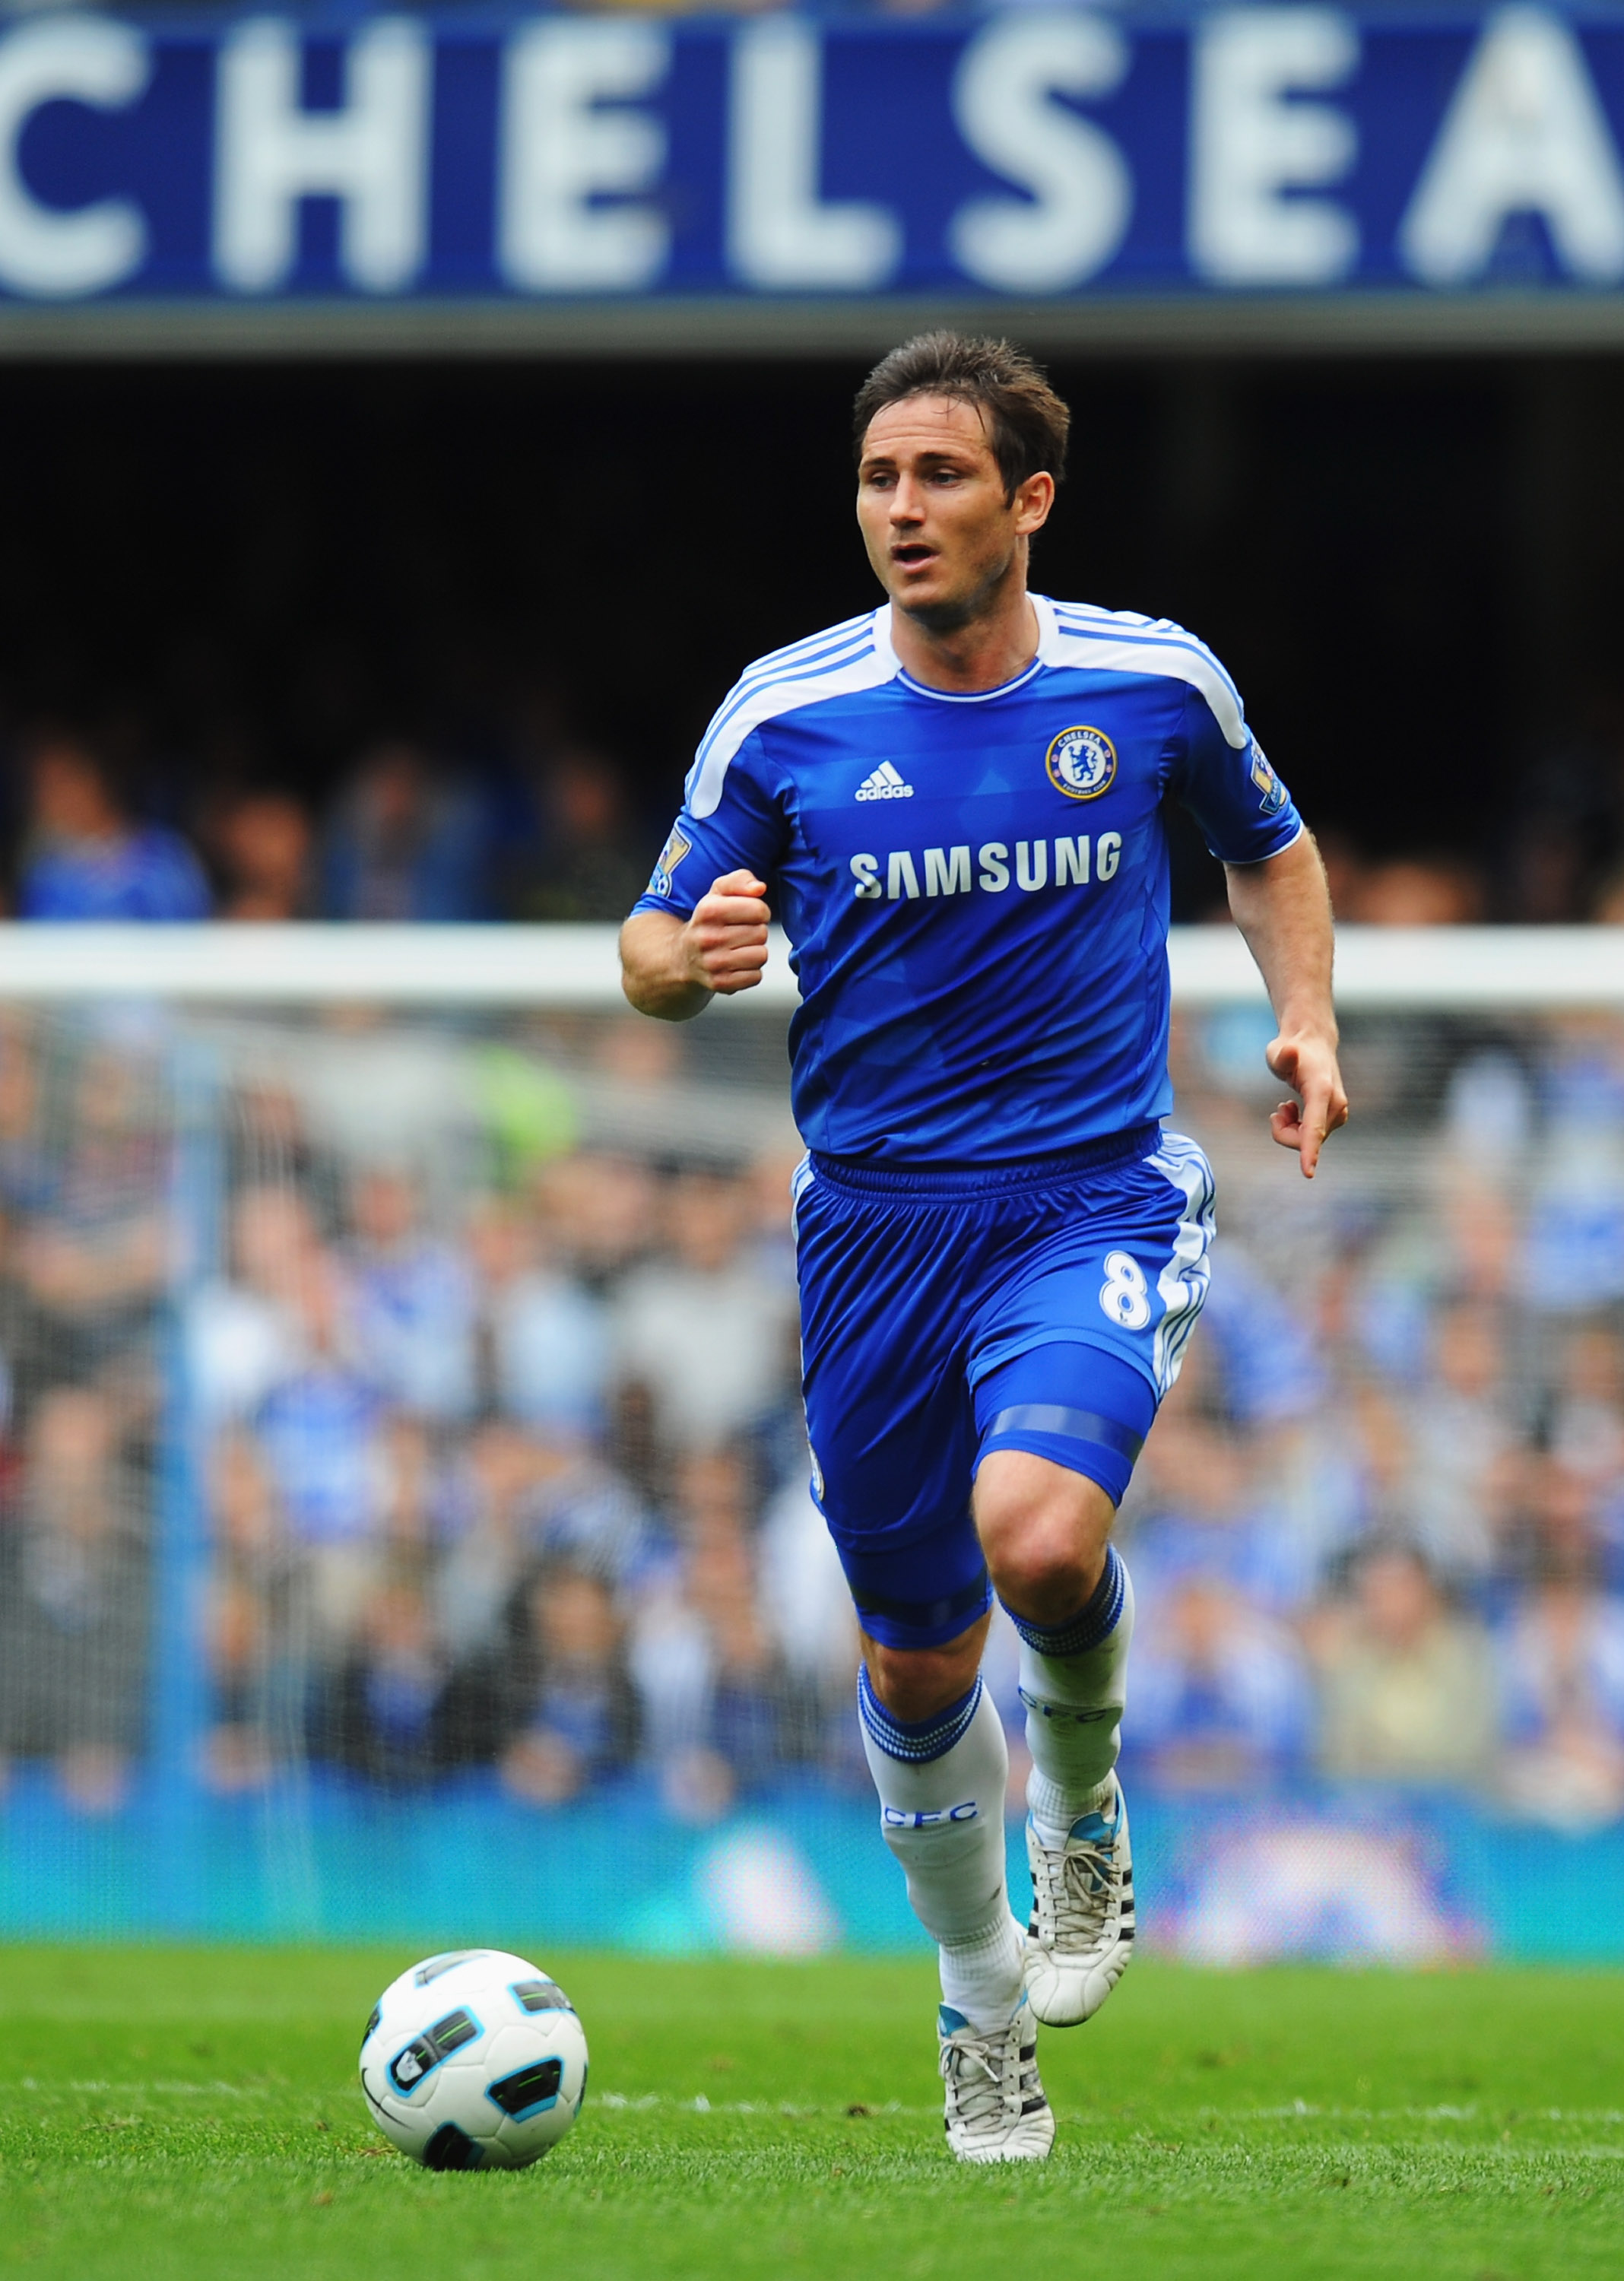 Will Lampard continue to be the face of Chelsea? He will be turning 33 in June